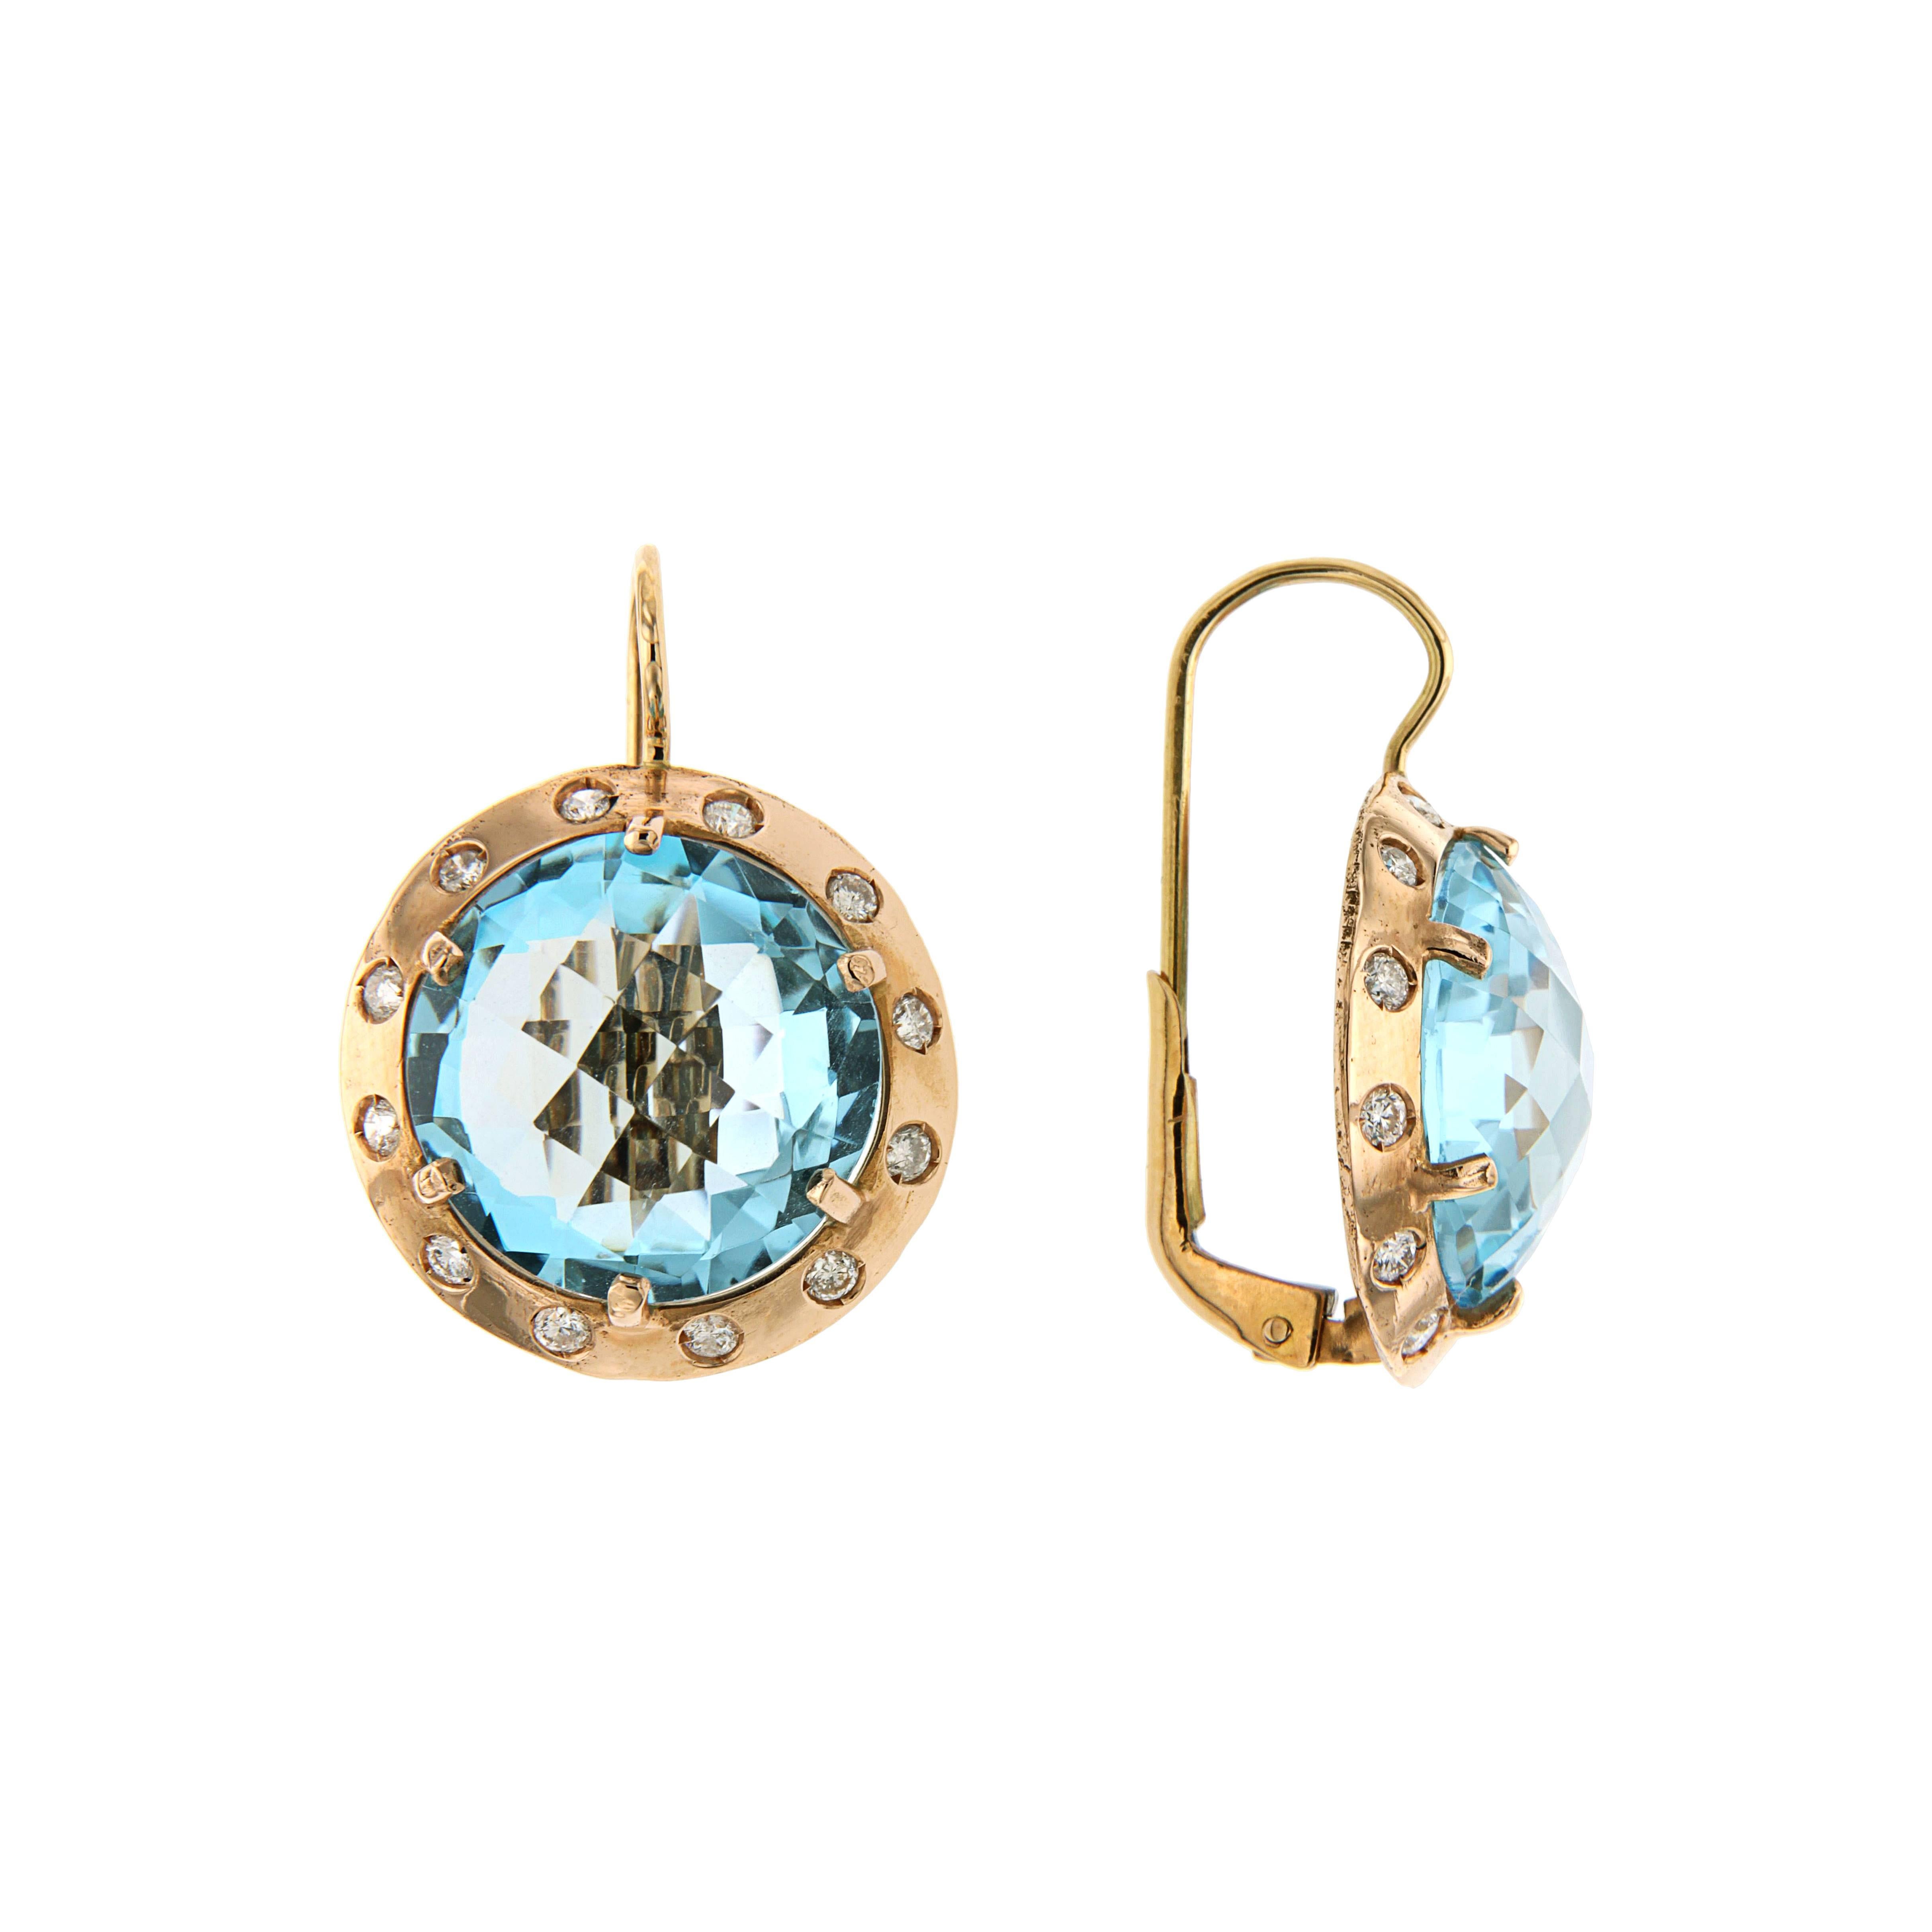 Briolette Cut Blue Topaz Diamonds Rose Gold Earrings Handcrafted in Italy